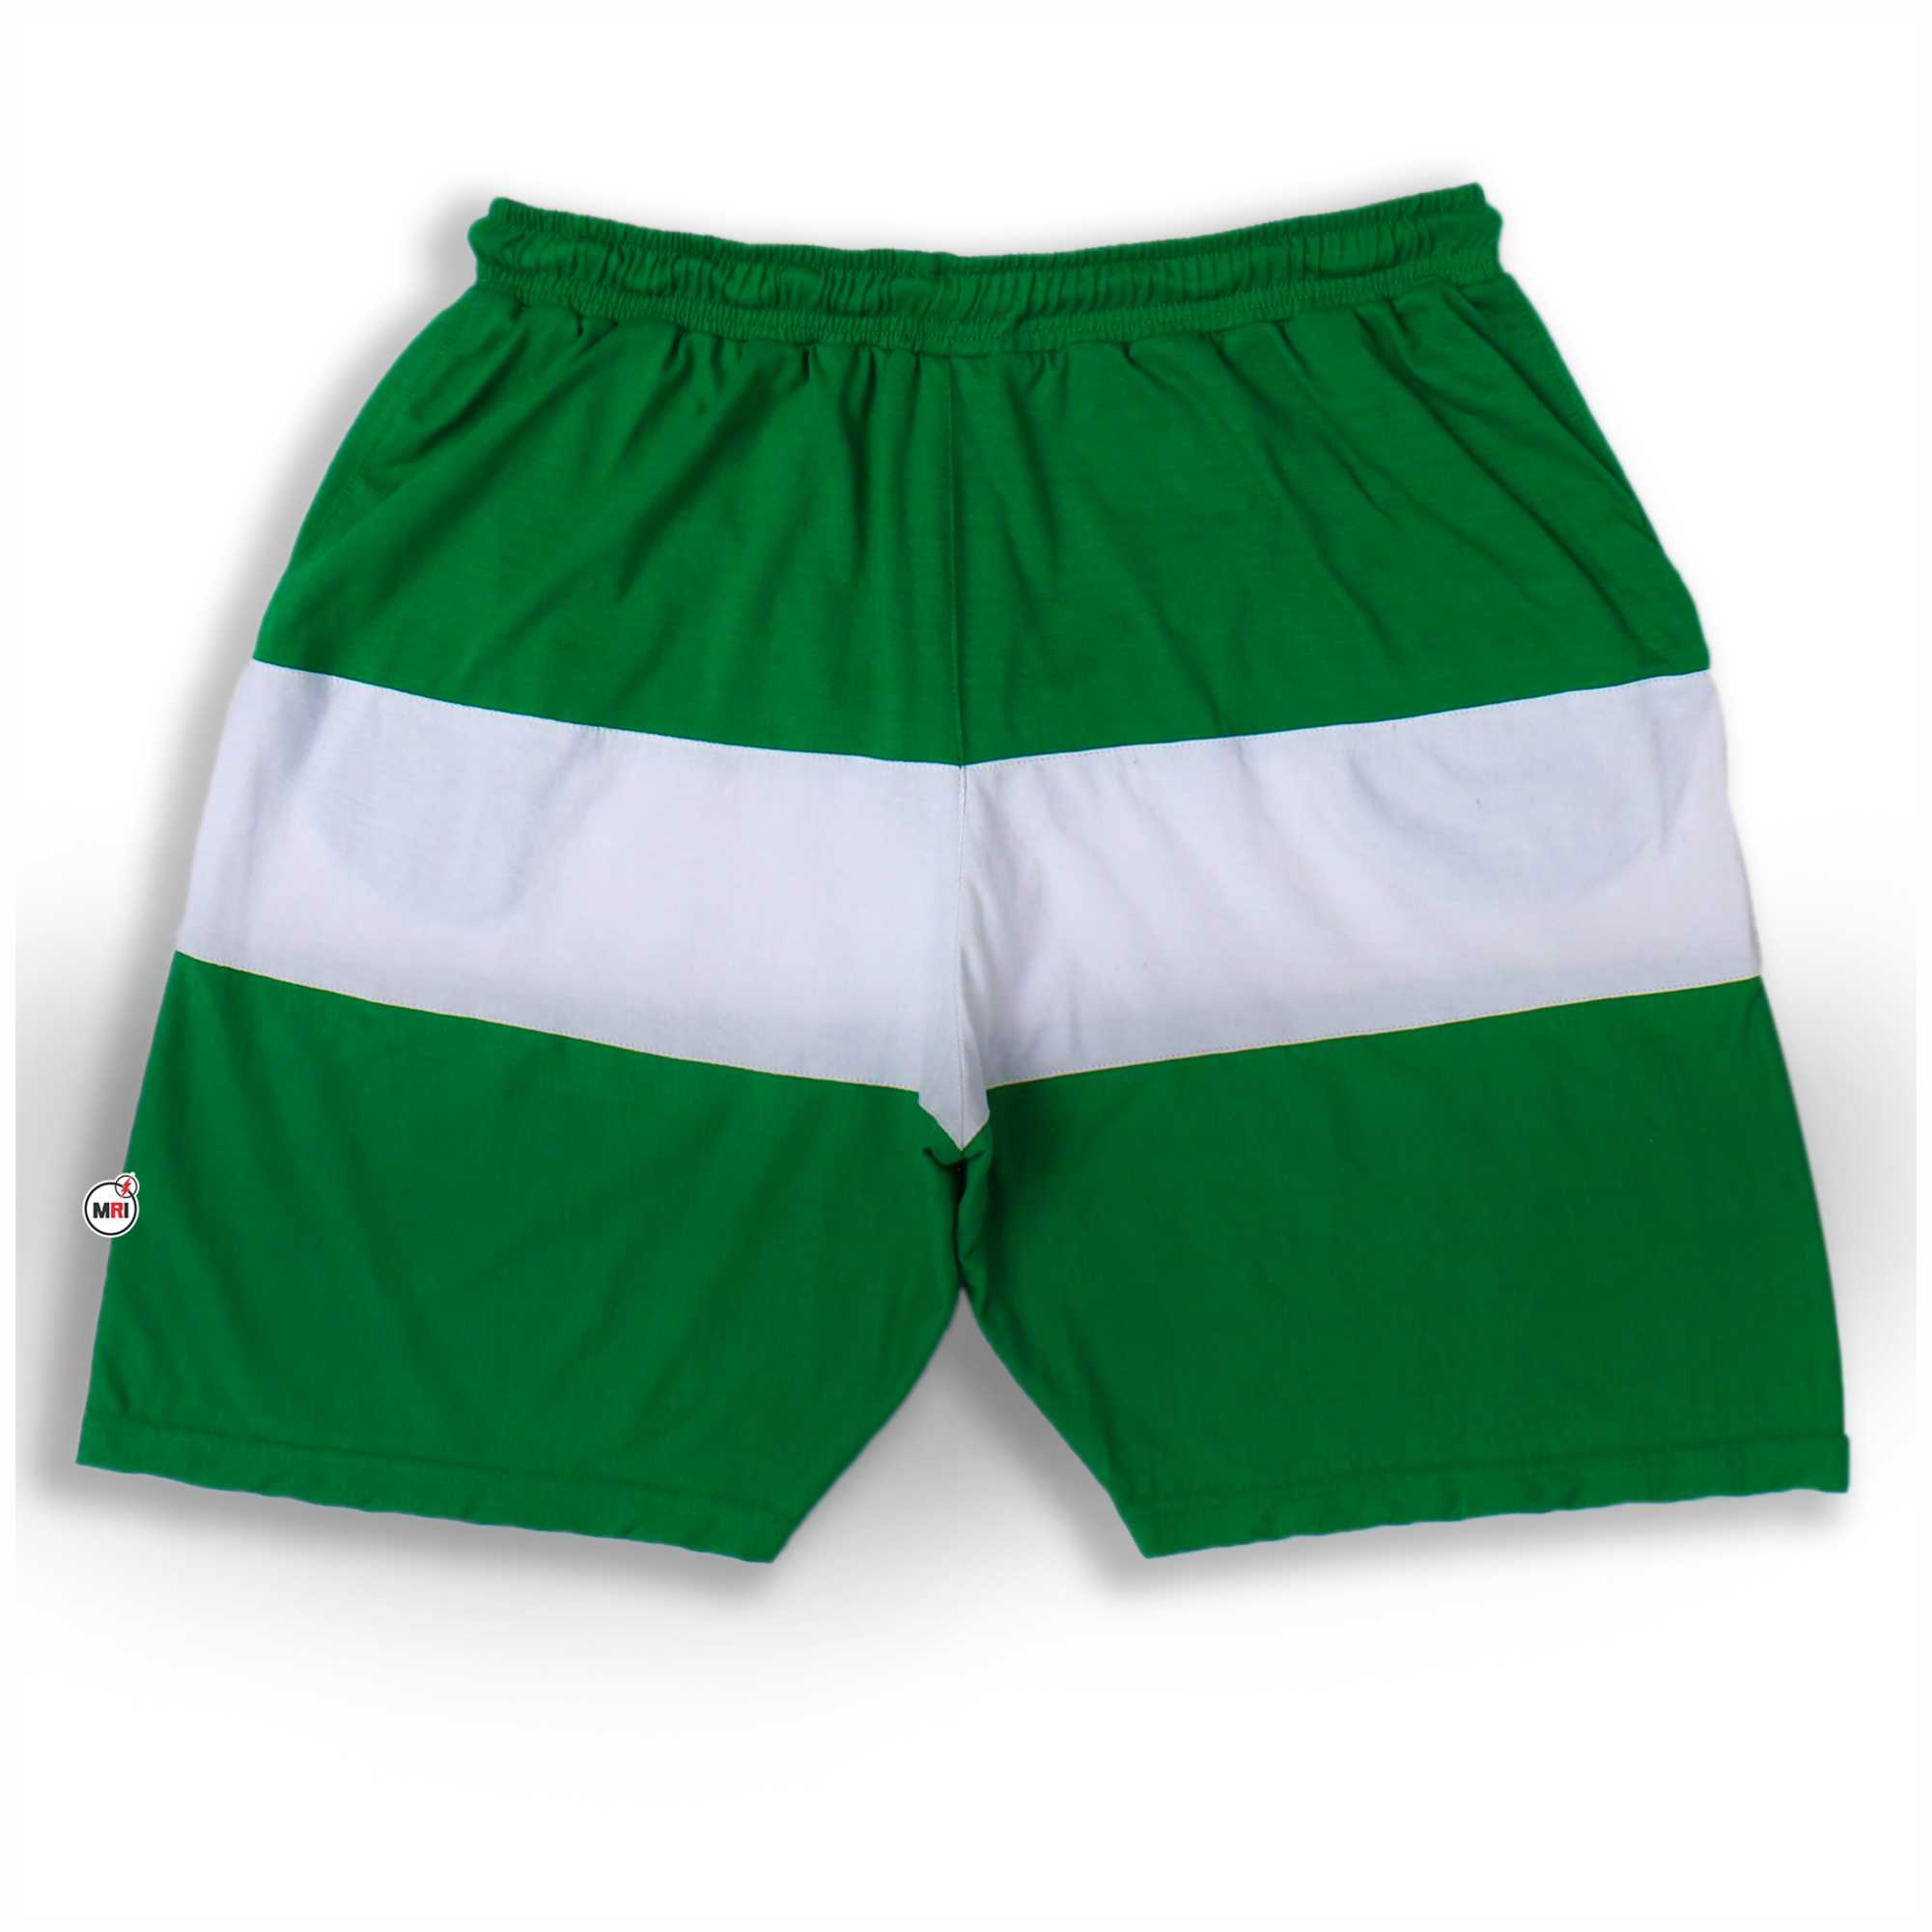 Unique Customized Cotton Jersey Two Tone Shorts